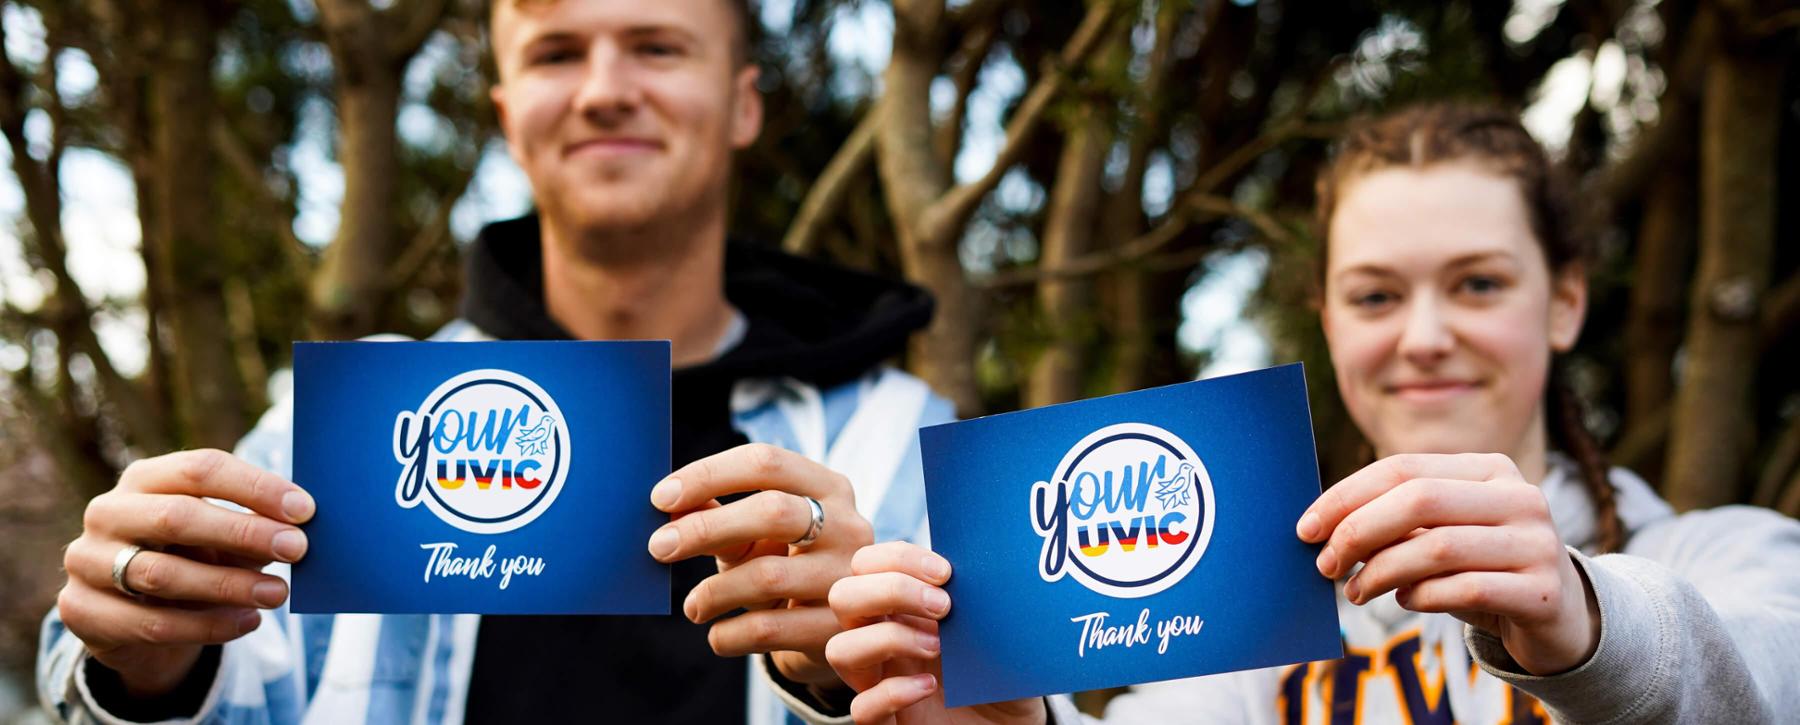 Two people stand smiling at the camera holding blue cards that say thank you with the Your UVic logo